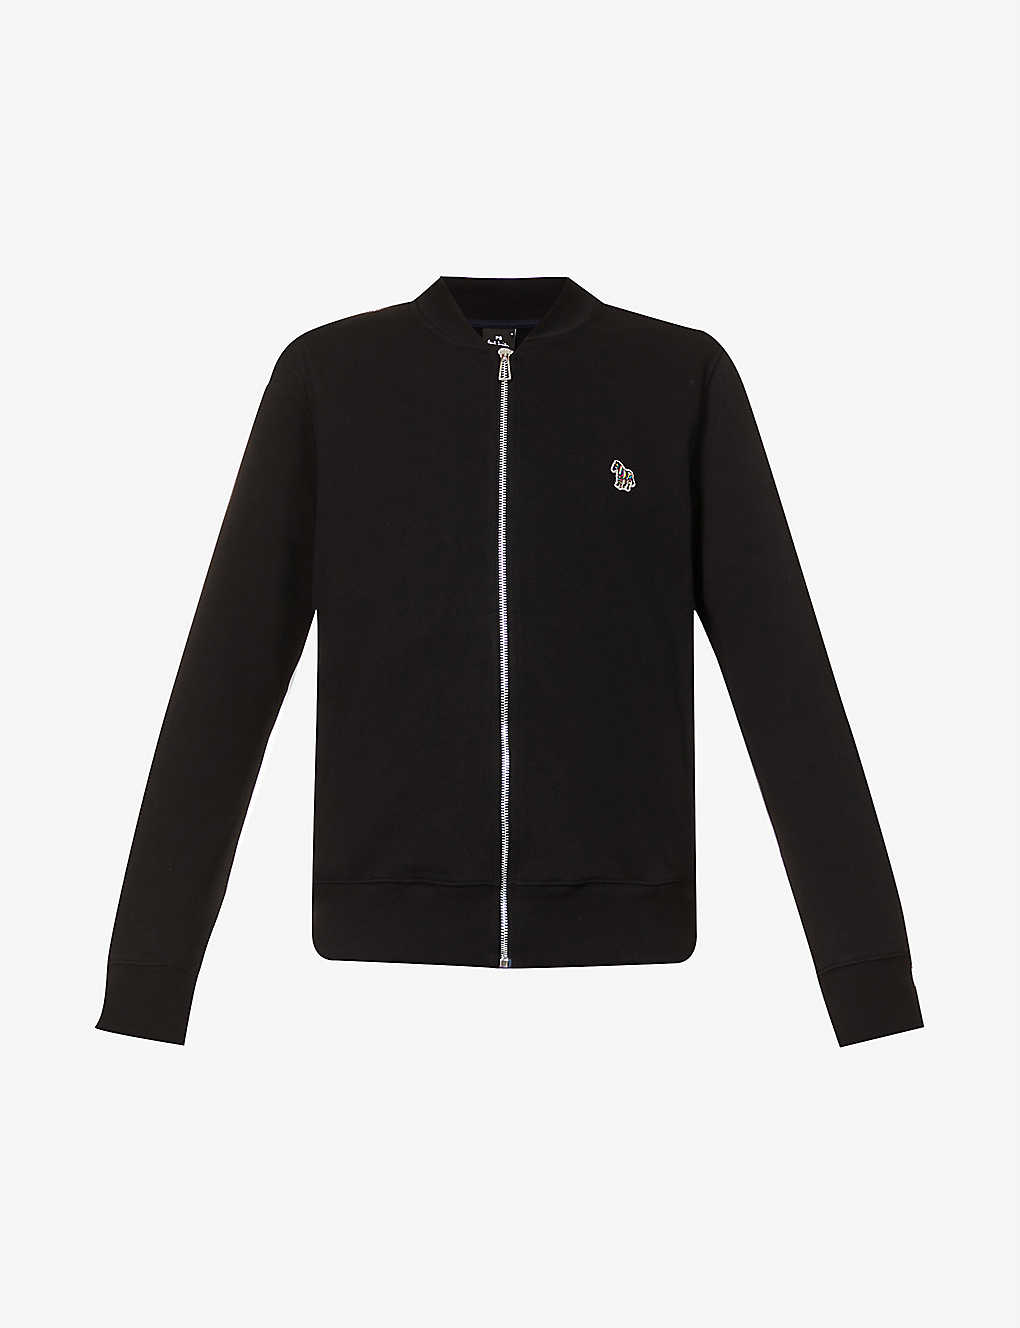 Shop Ps By Paul Smith Men's Black Zebra-embroidered Long-sleeve Organic-cotton Bomber Jacket